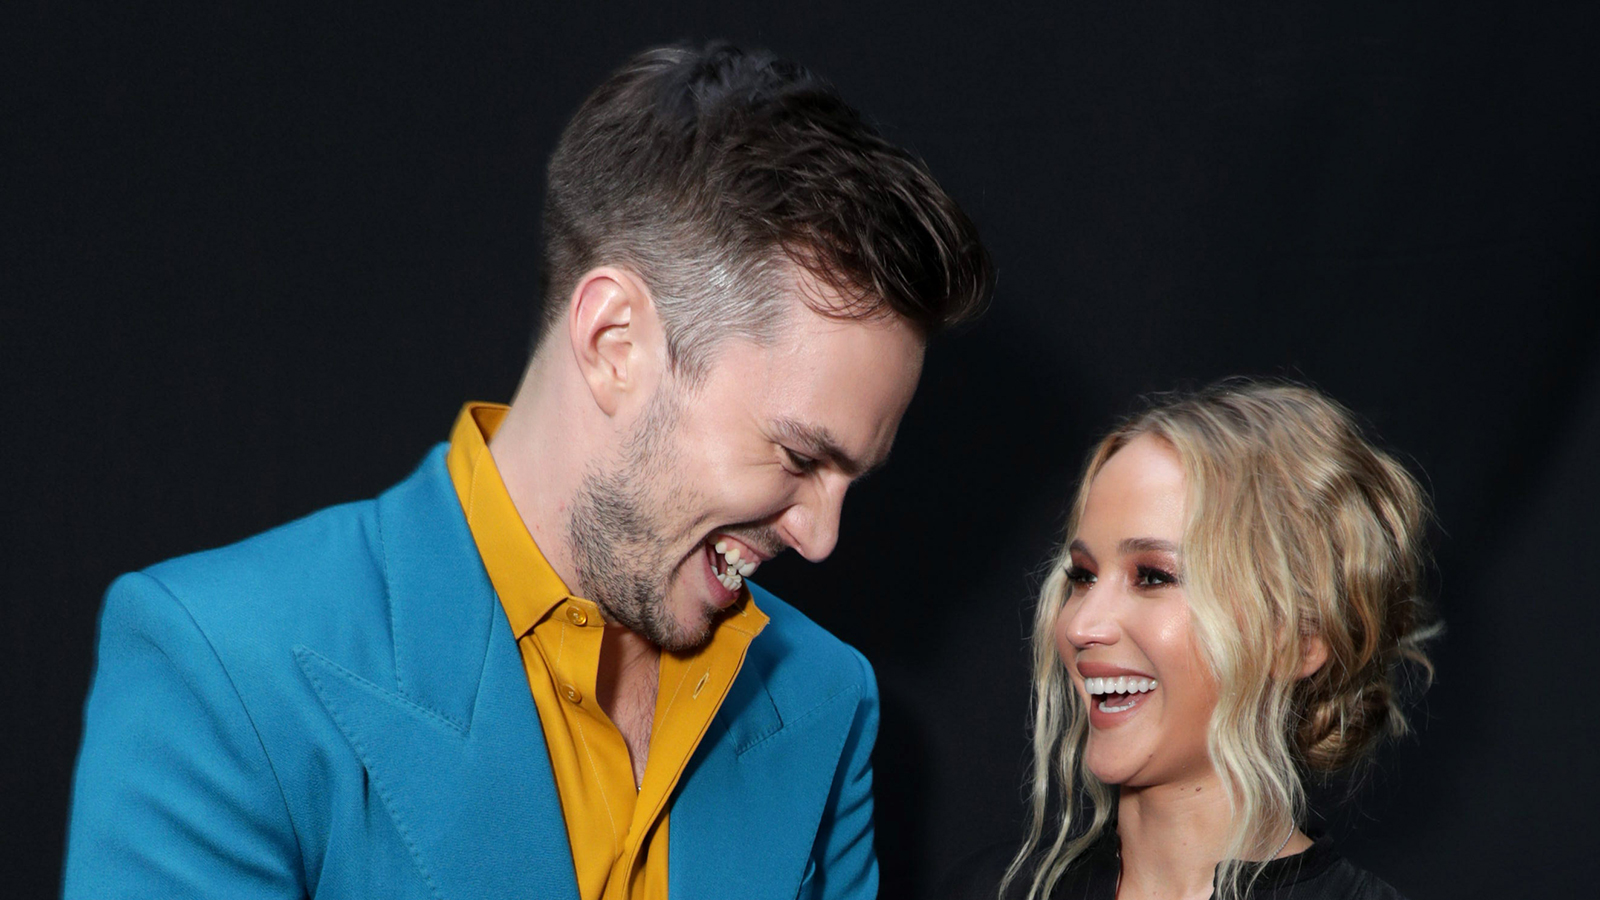 Were nicholas hoult and jennifer lawrence engaged?